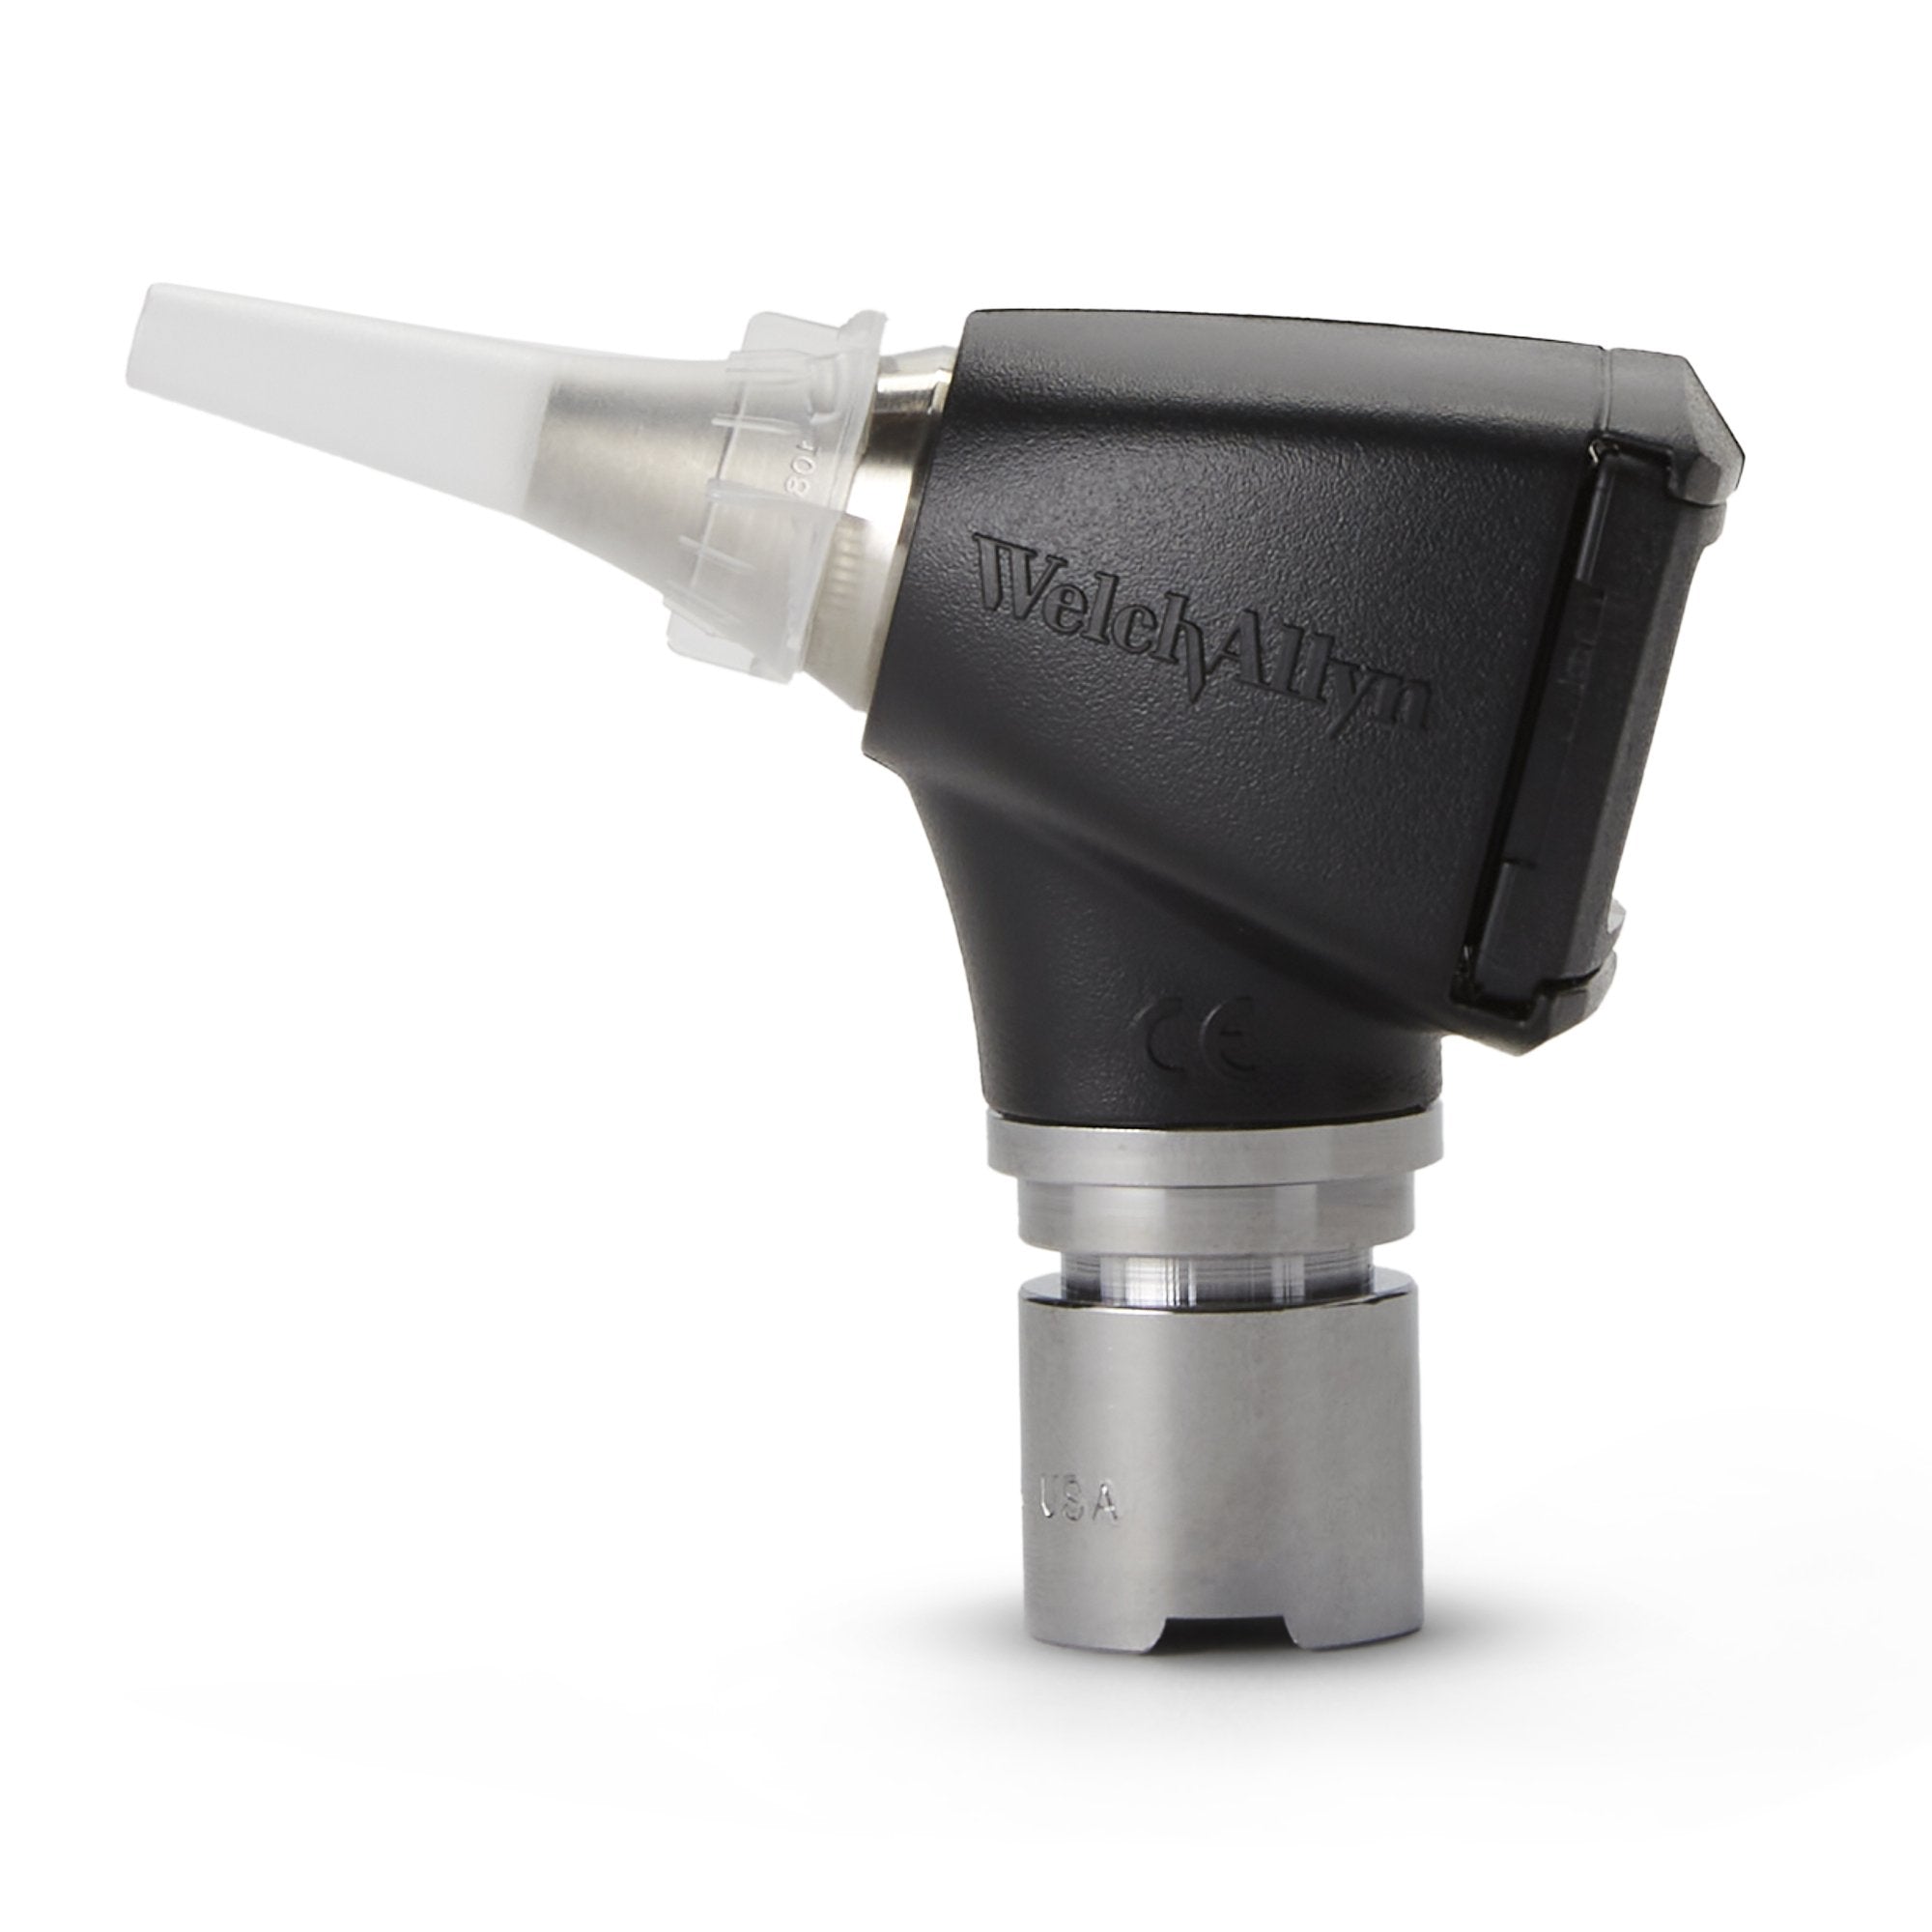 Welch Allyn Diagnostic Otoscope Head - 3.5 Volt Halogen HPX Lamp